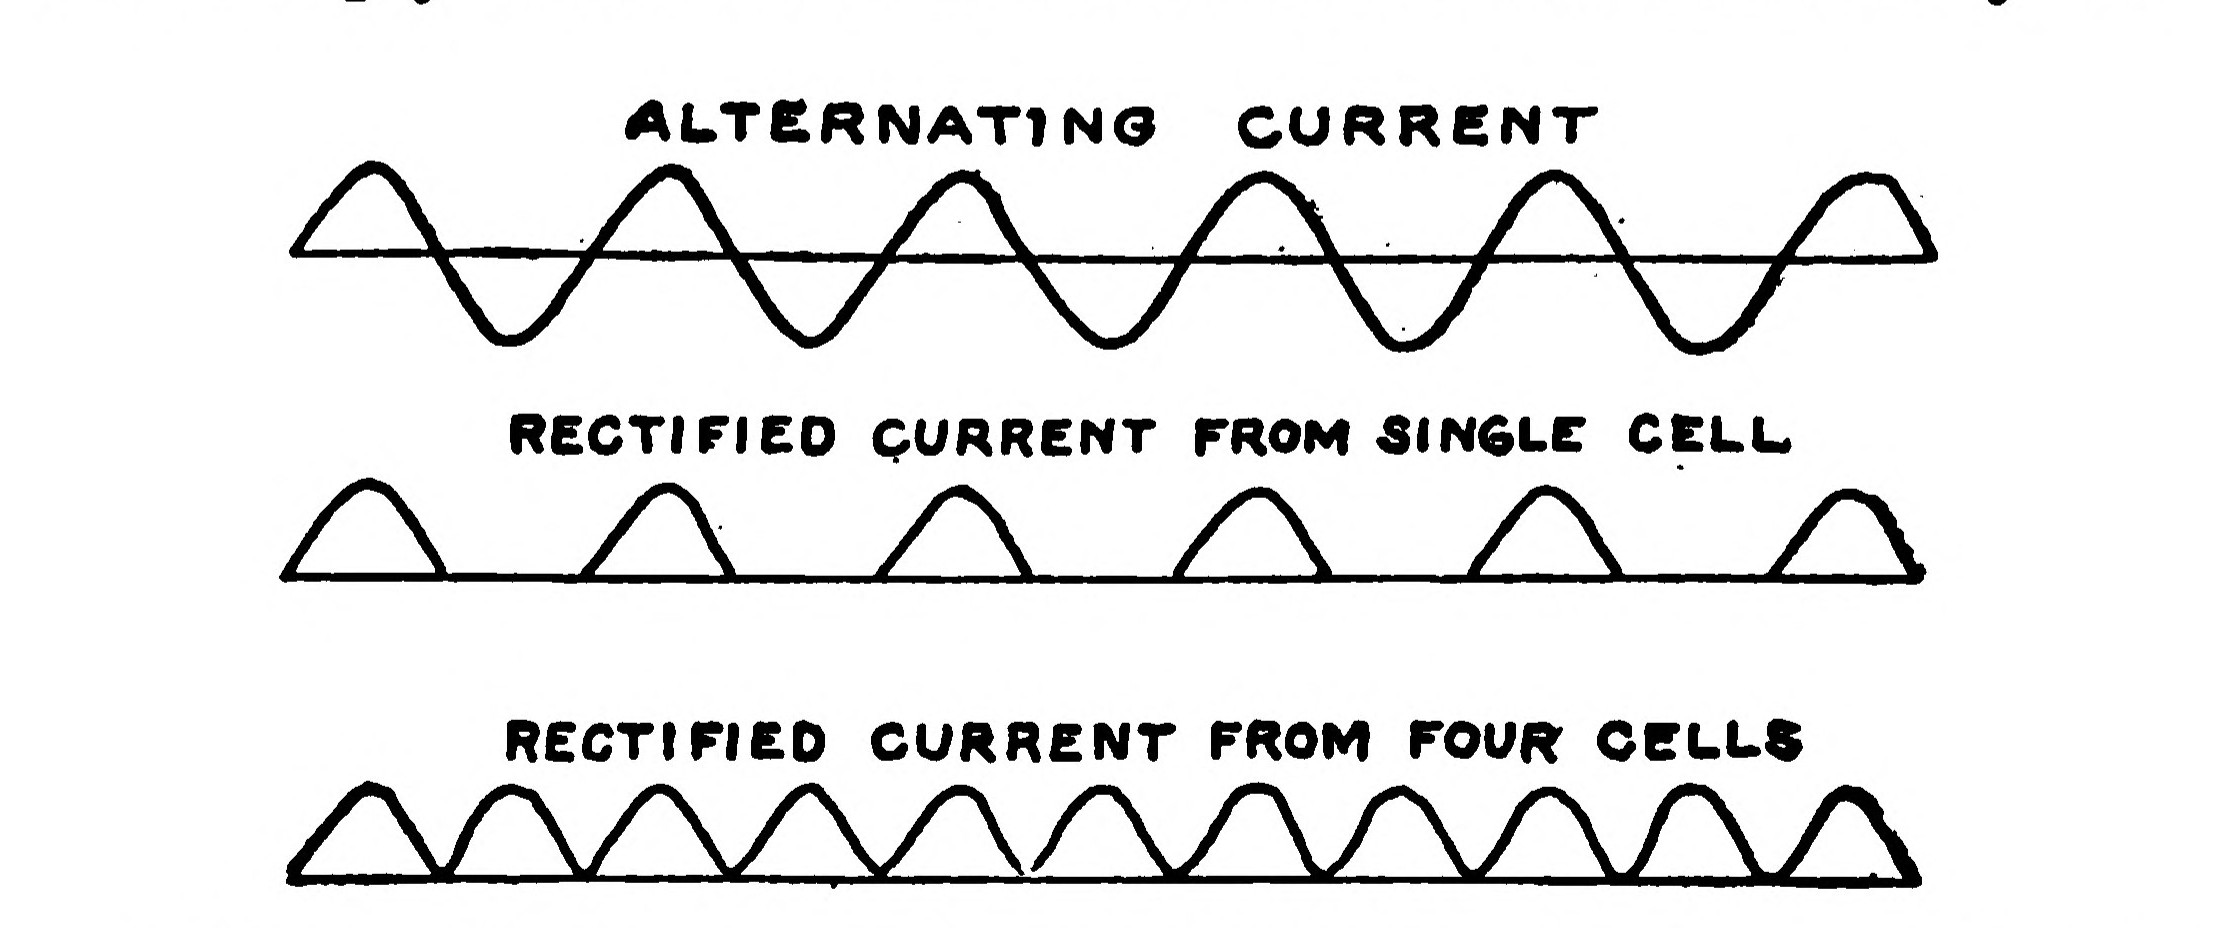 FIG. 55.—Diagram showing the Difference in Current after it has been passed through a Single Cell or Rectifier and after passing through a Four-Cell Rectifier.